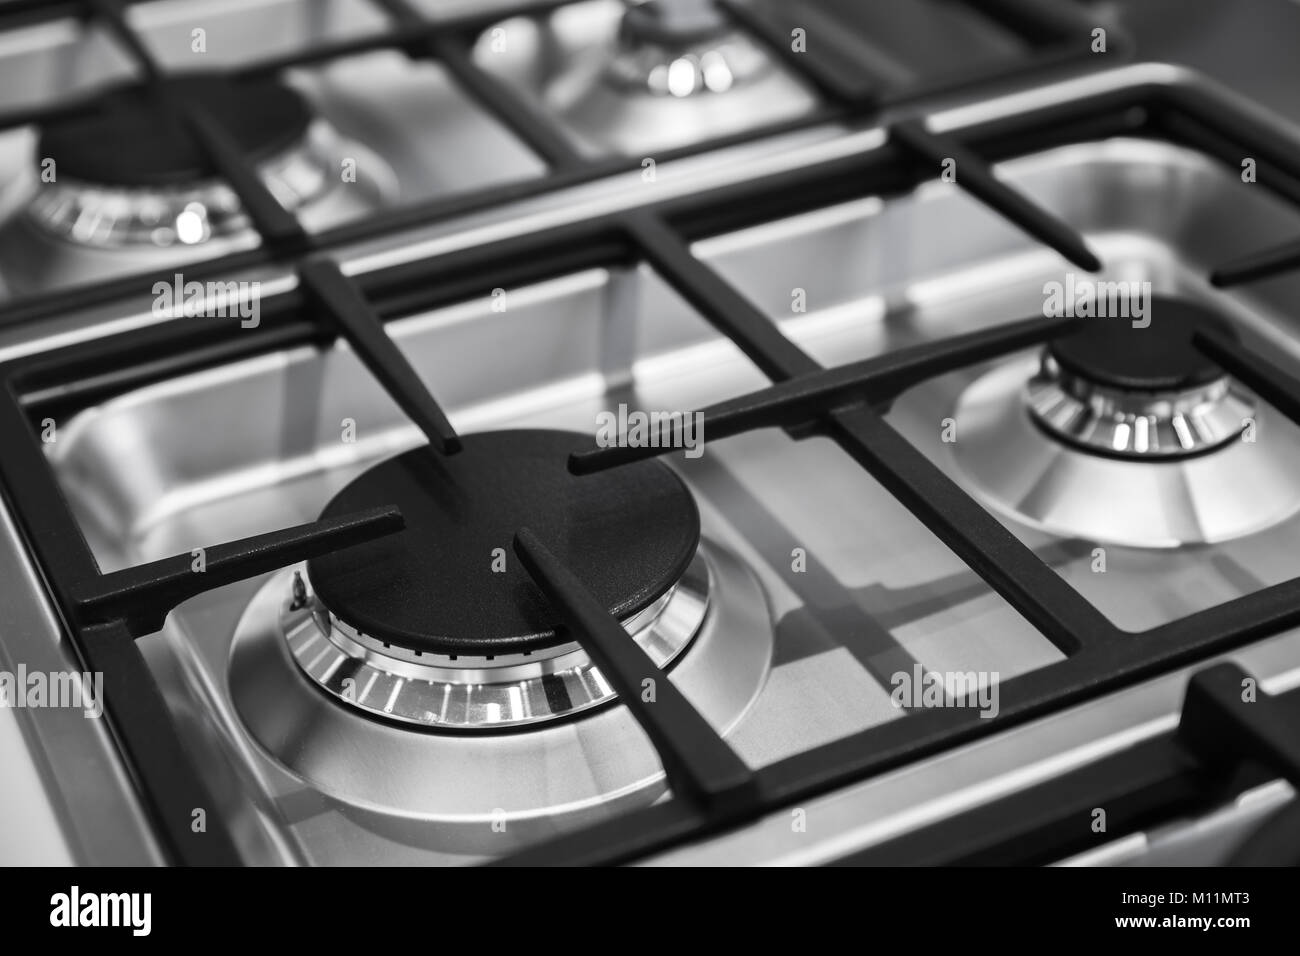 Modern gas stove burners made of shiny stainless steel and cast iron Stock Photo